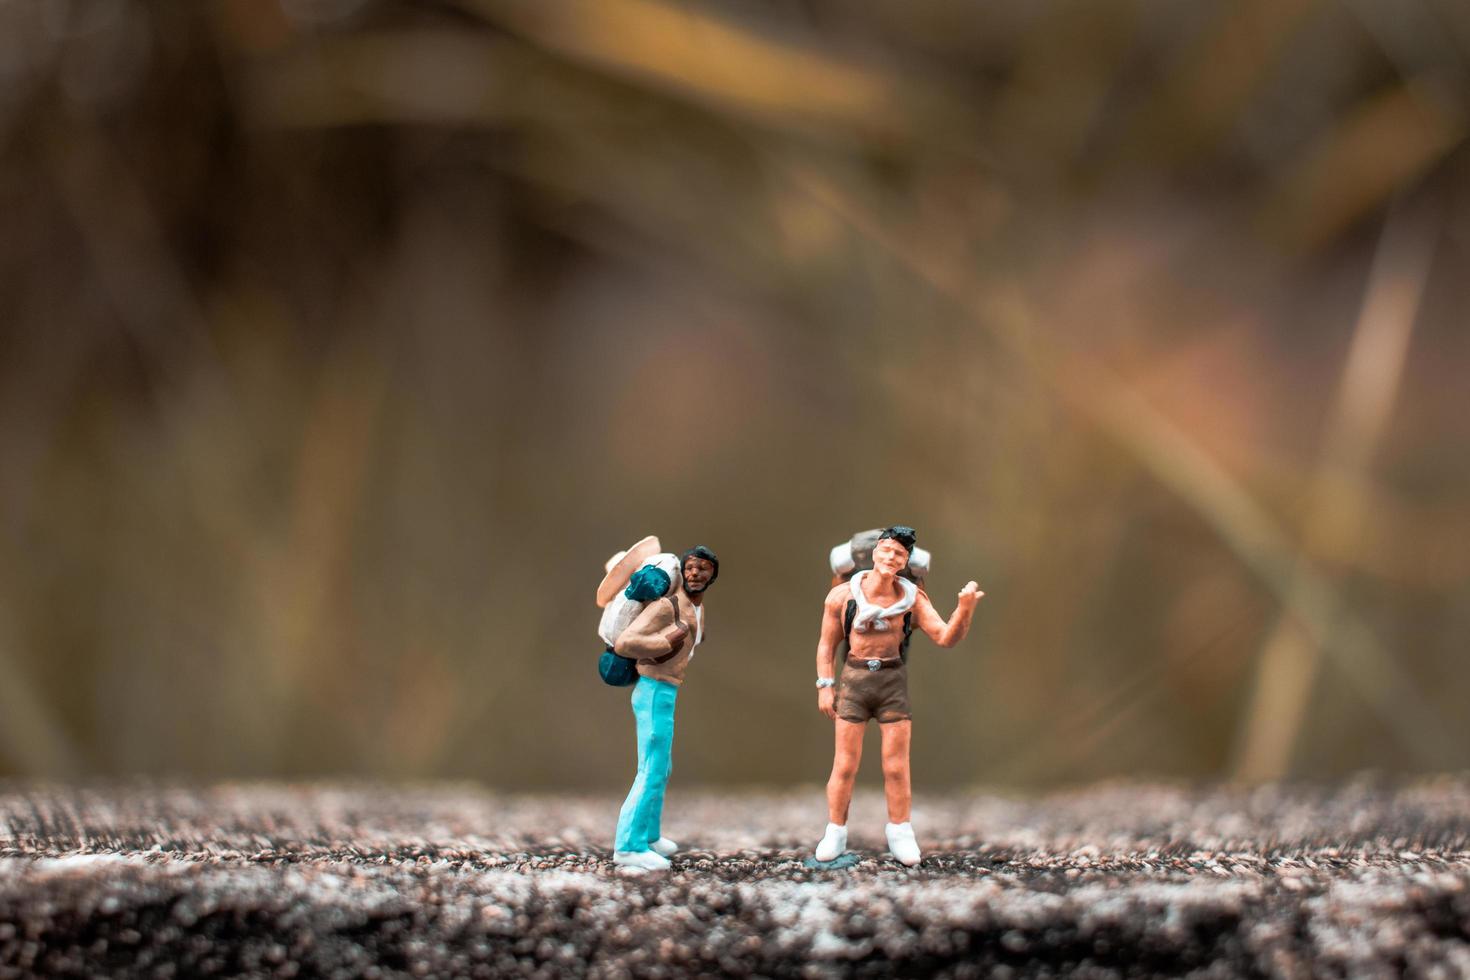 Miniature backpackers standing on a concrete floor with a bokeh nature background photo